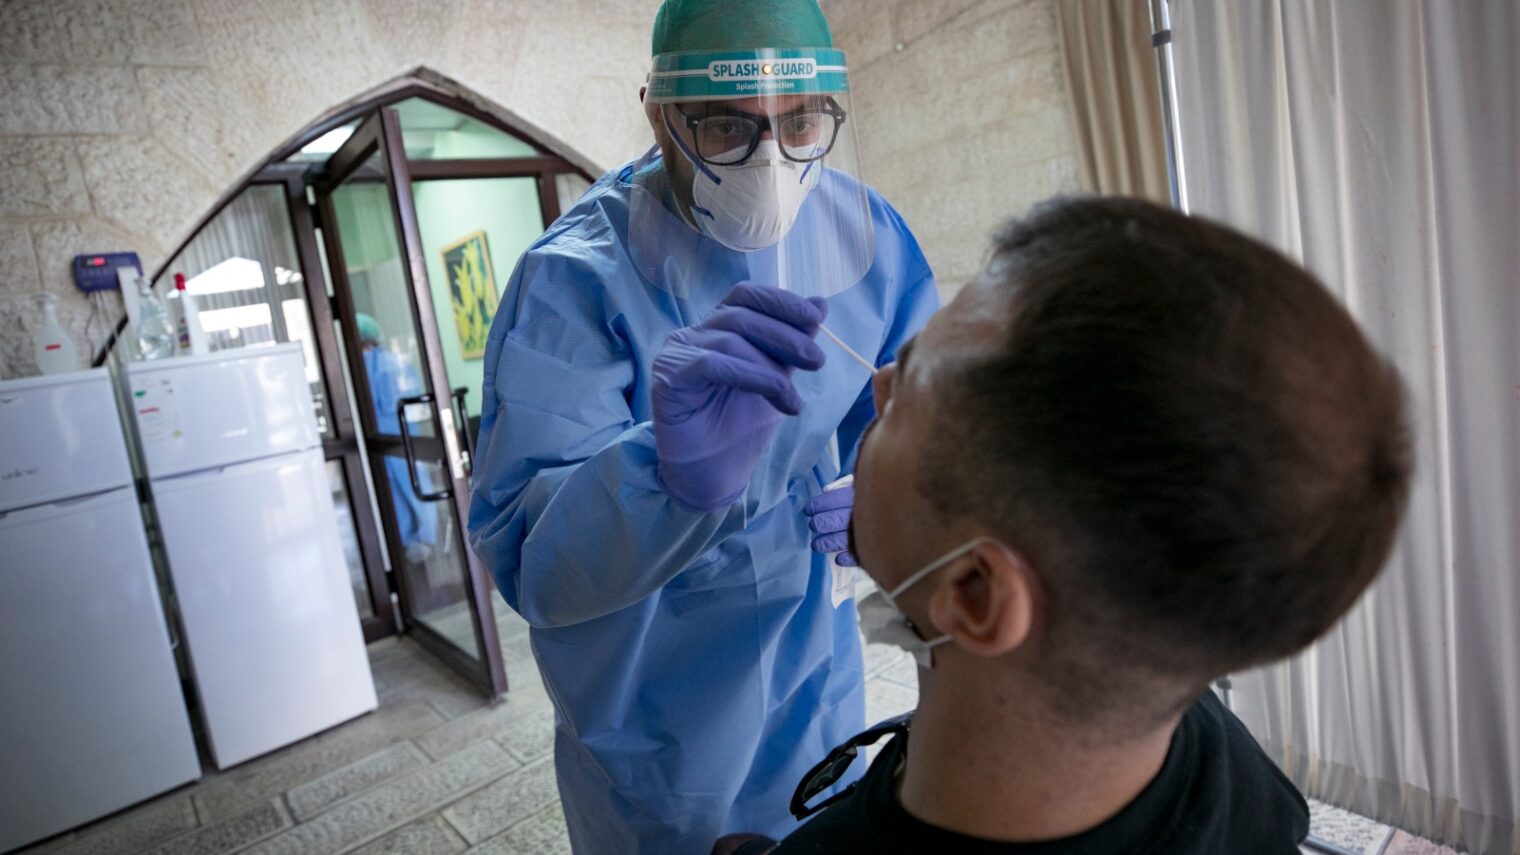 A Jerusalem man getting tested for Covid-19 on October 8, 2020. Photo by Olivier Fitoussi/Flash90